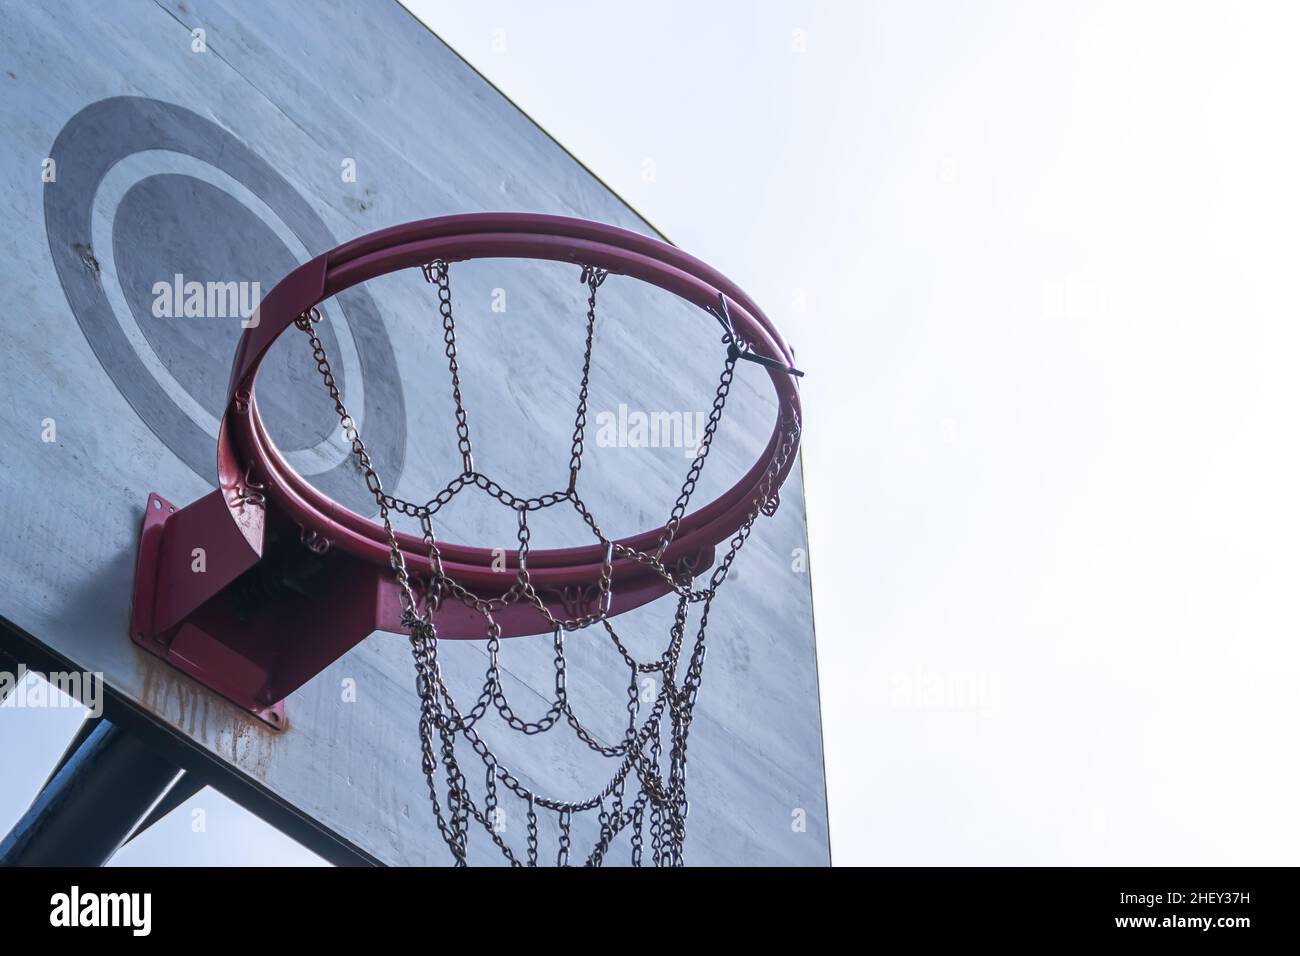 Low angle view of basketball hoop under the morning sunlight Stock Photo